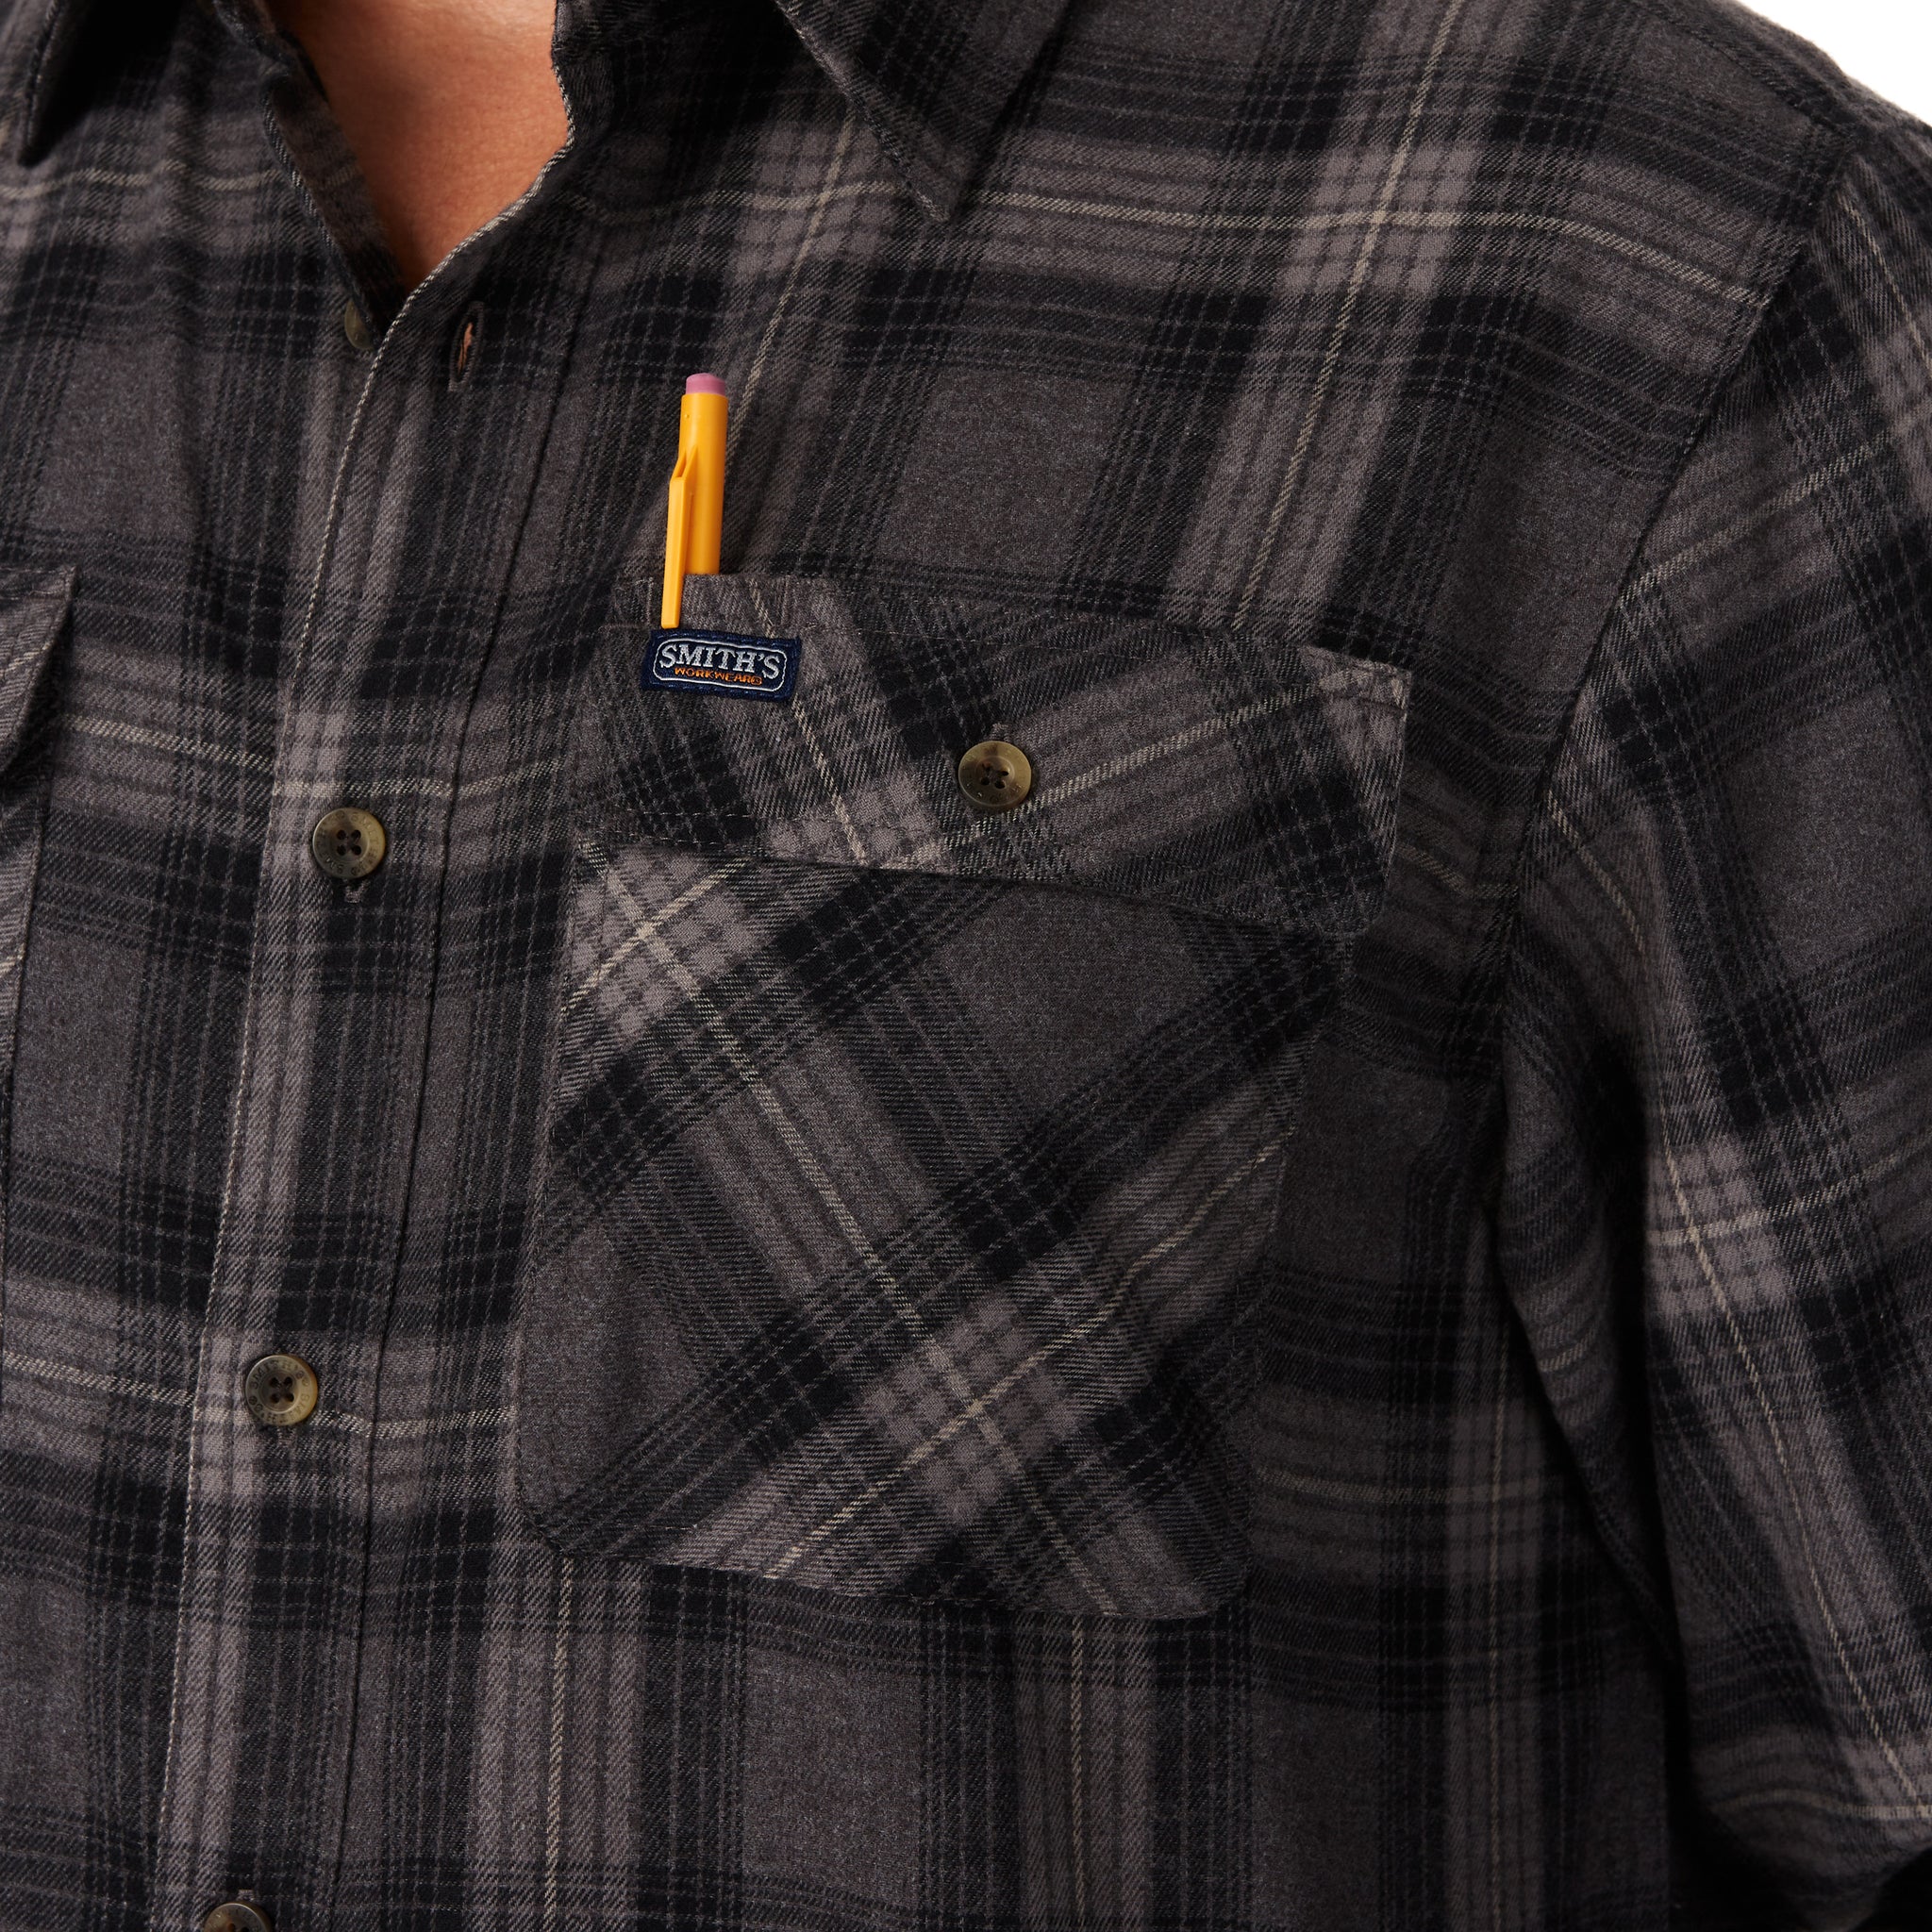 LONG SLEEVE 2-POCKET PLAID FLANNEL SHIRT WITH PEN-SLOT